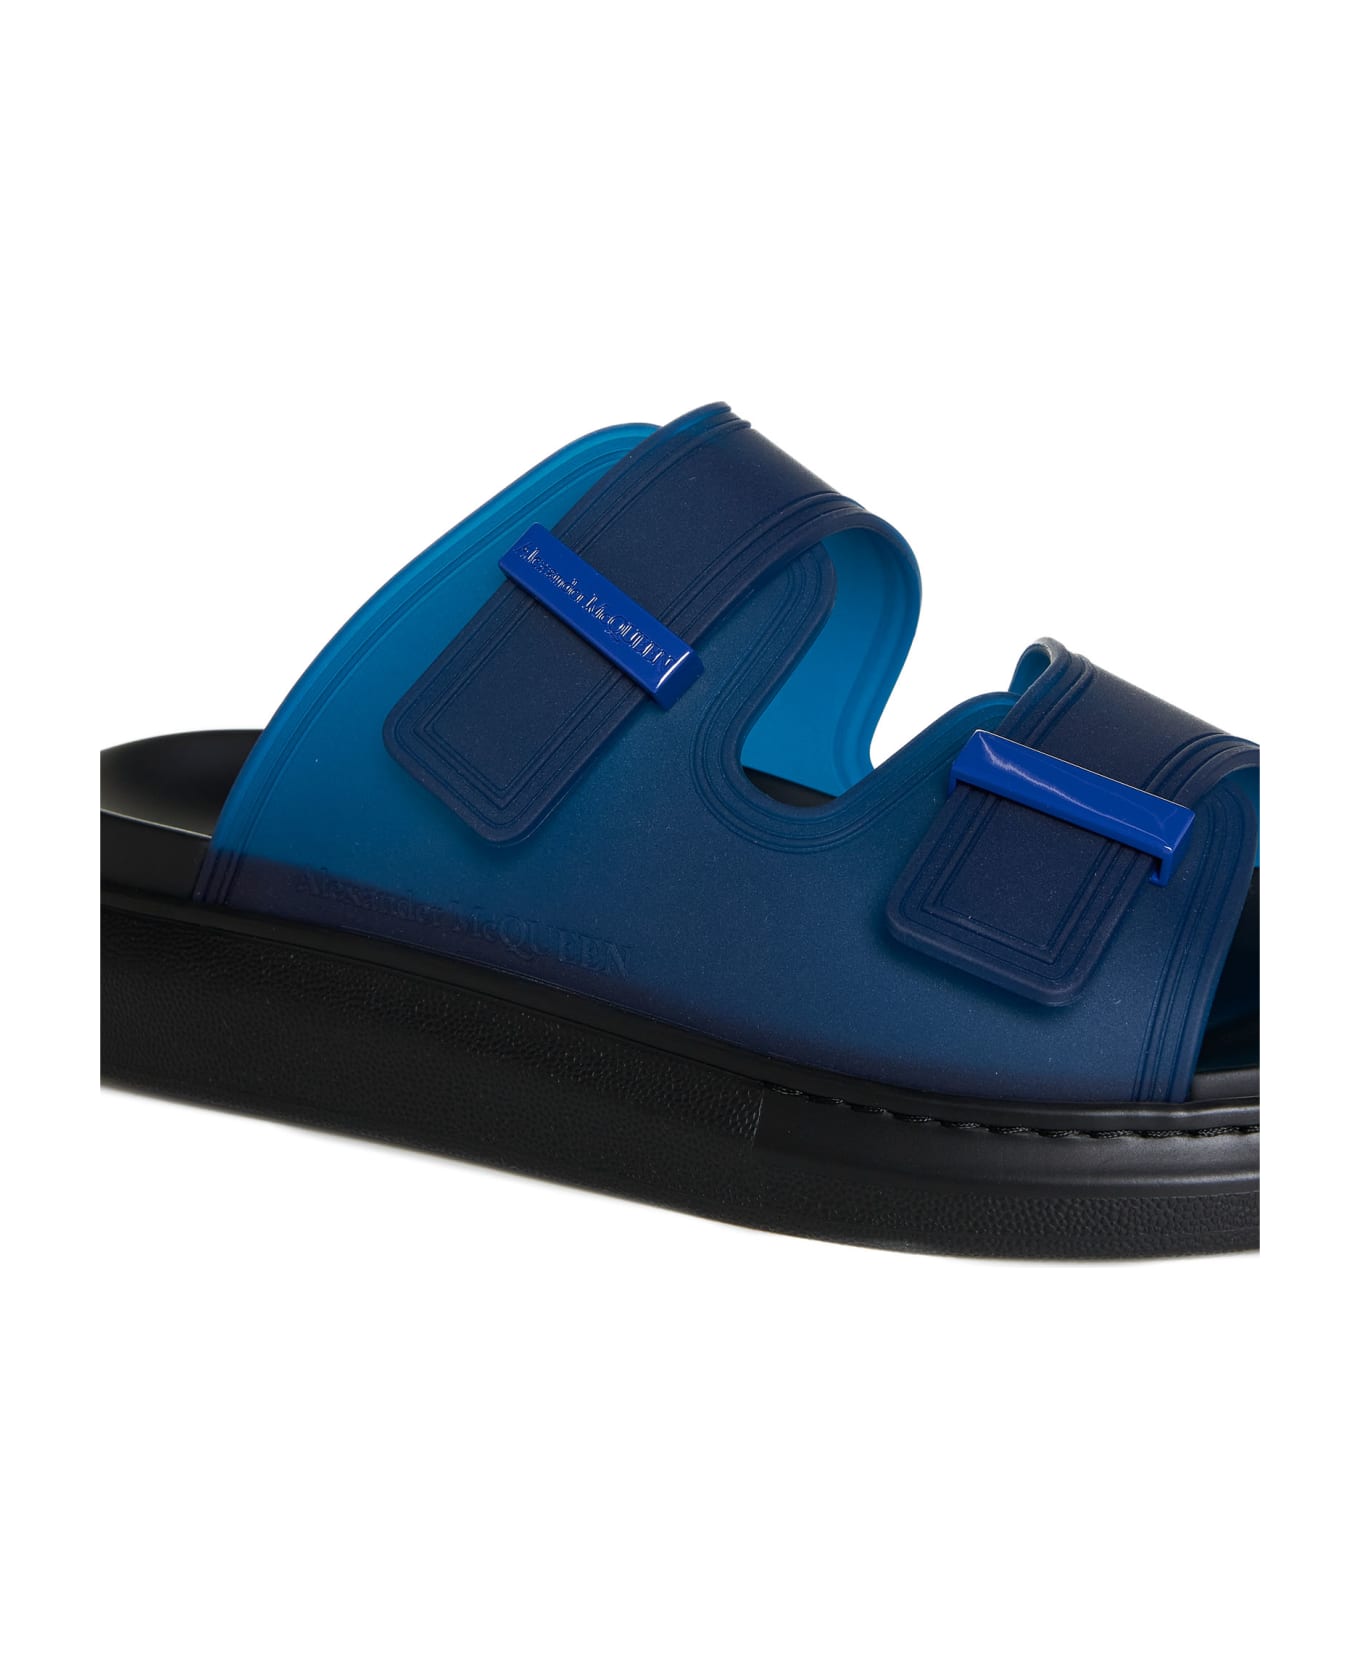 Alexander McQueen Shoes - Electric blue 241 その他各種シューズ